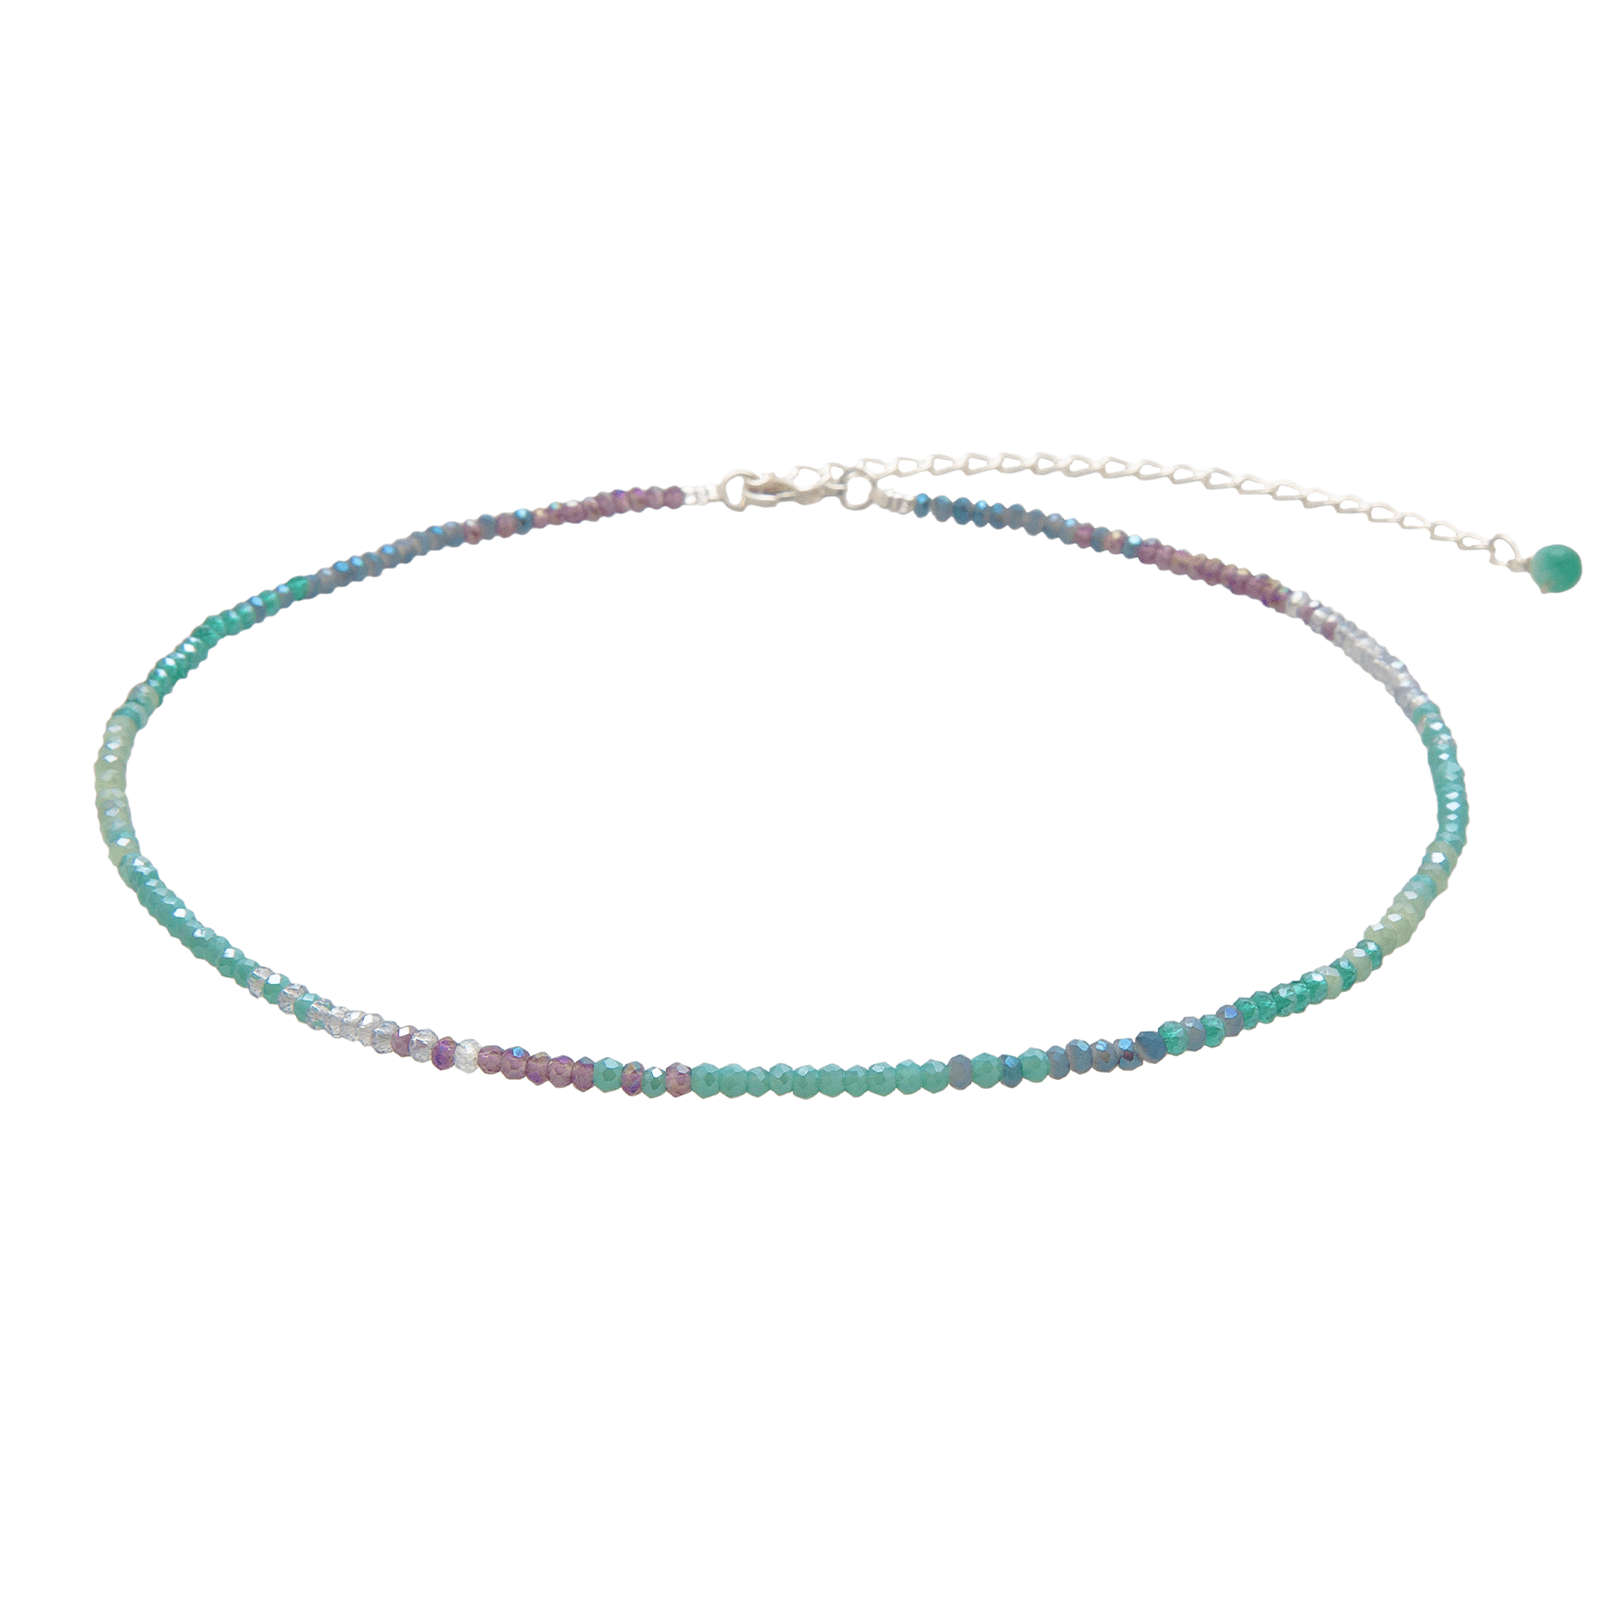 Purple, teal and blue stone goddess necklace on gold chain